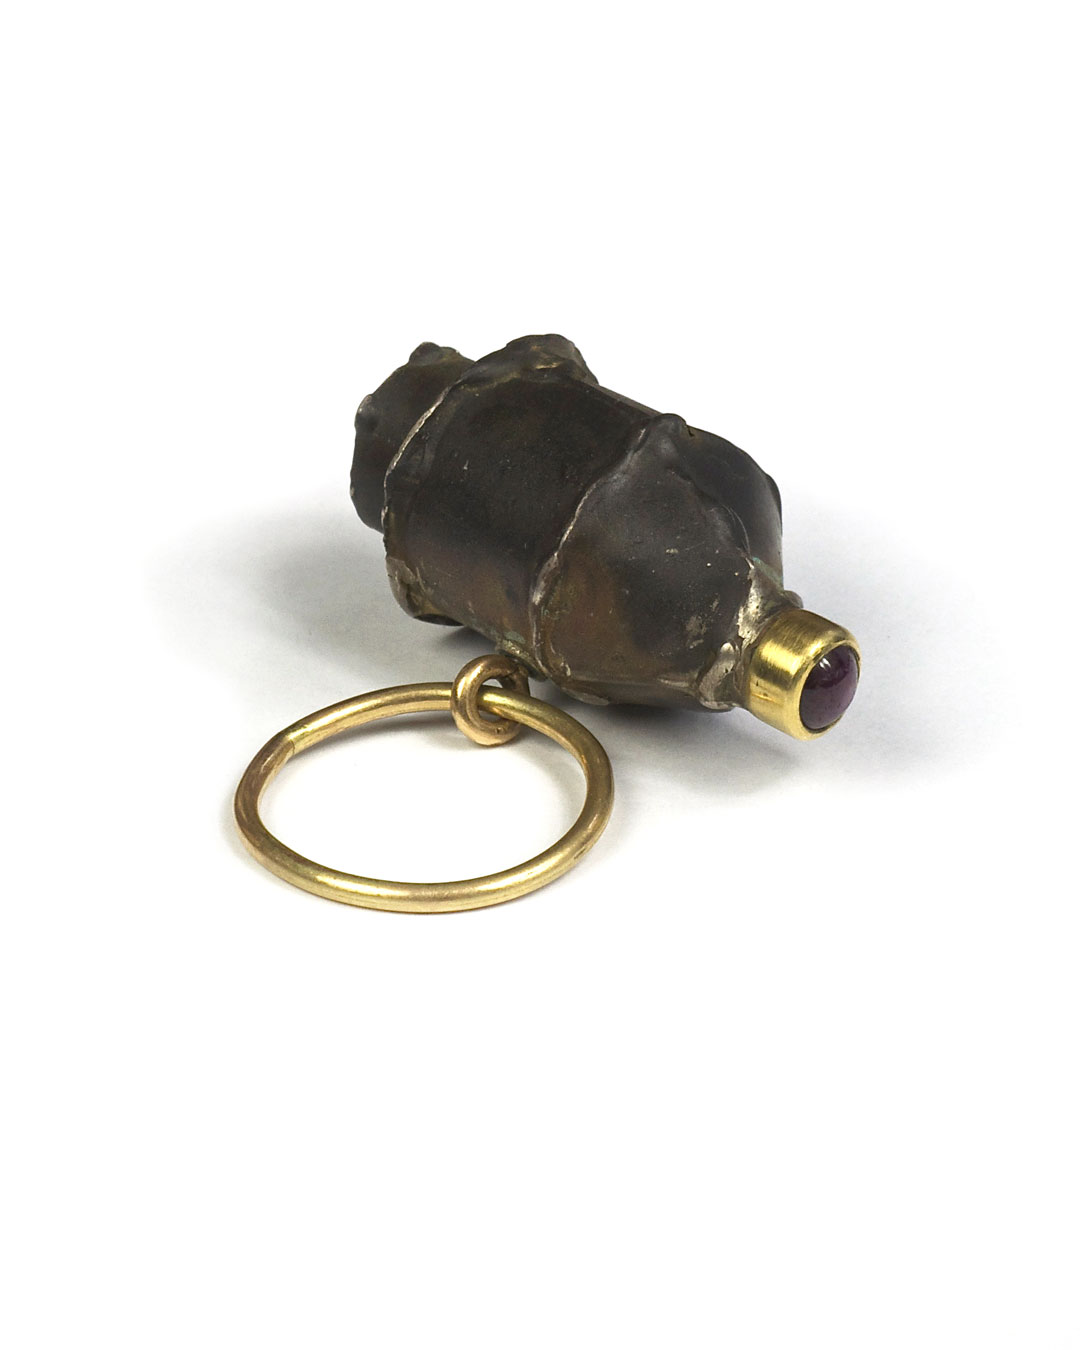 Andrea Wippermann, untitled, 1998, ring; silver, 14ct gold, ruby, 40 x 35 x 19 mm, €1350